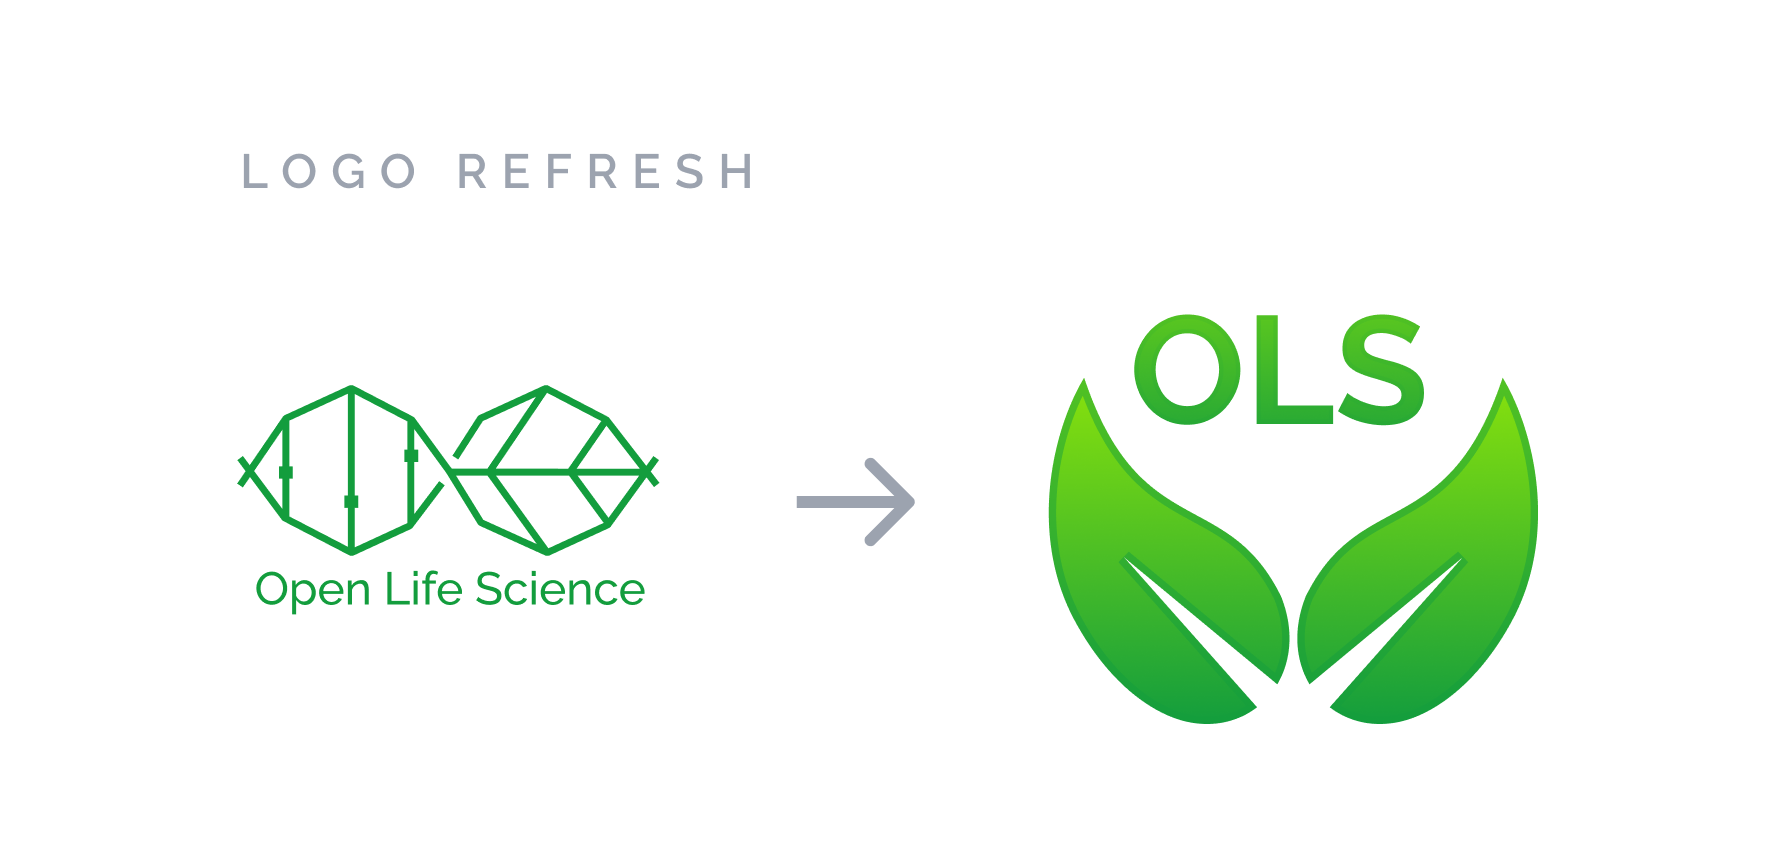 The image shows the previous Open Life Science logo on the left and the new logo on the right.